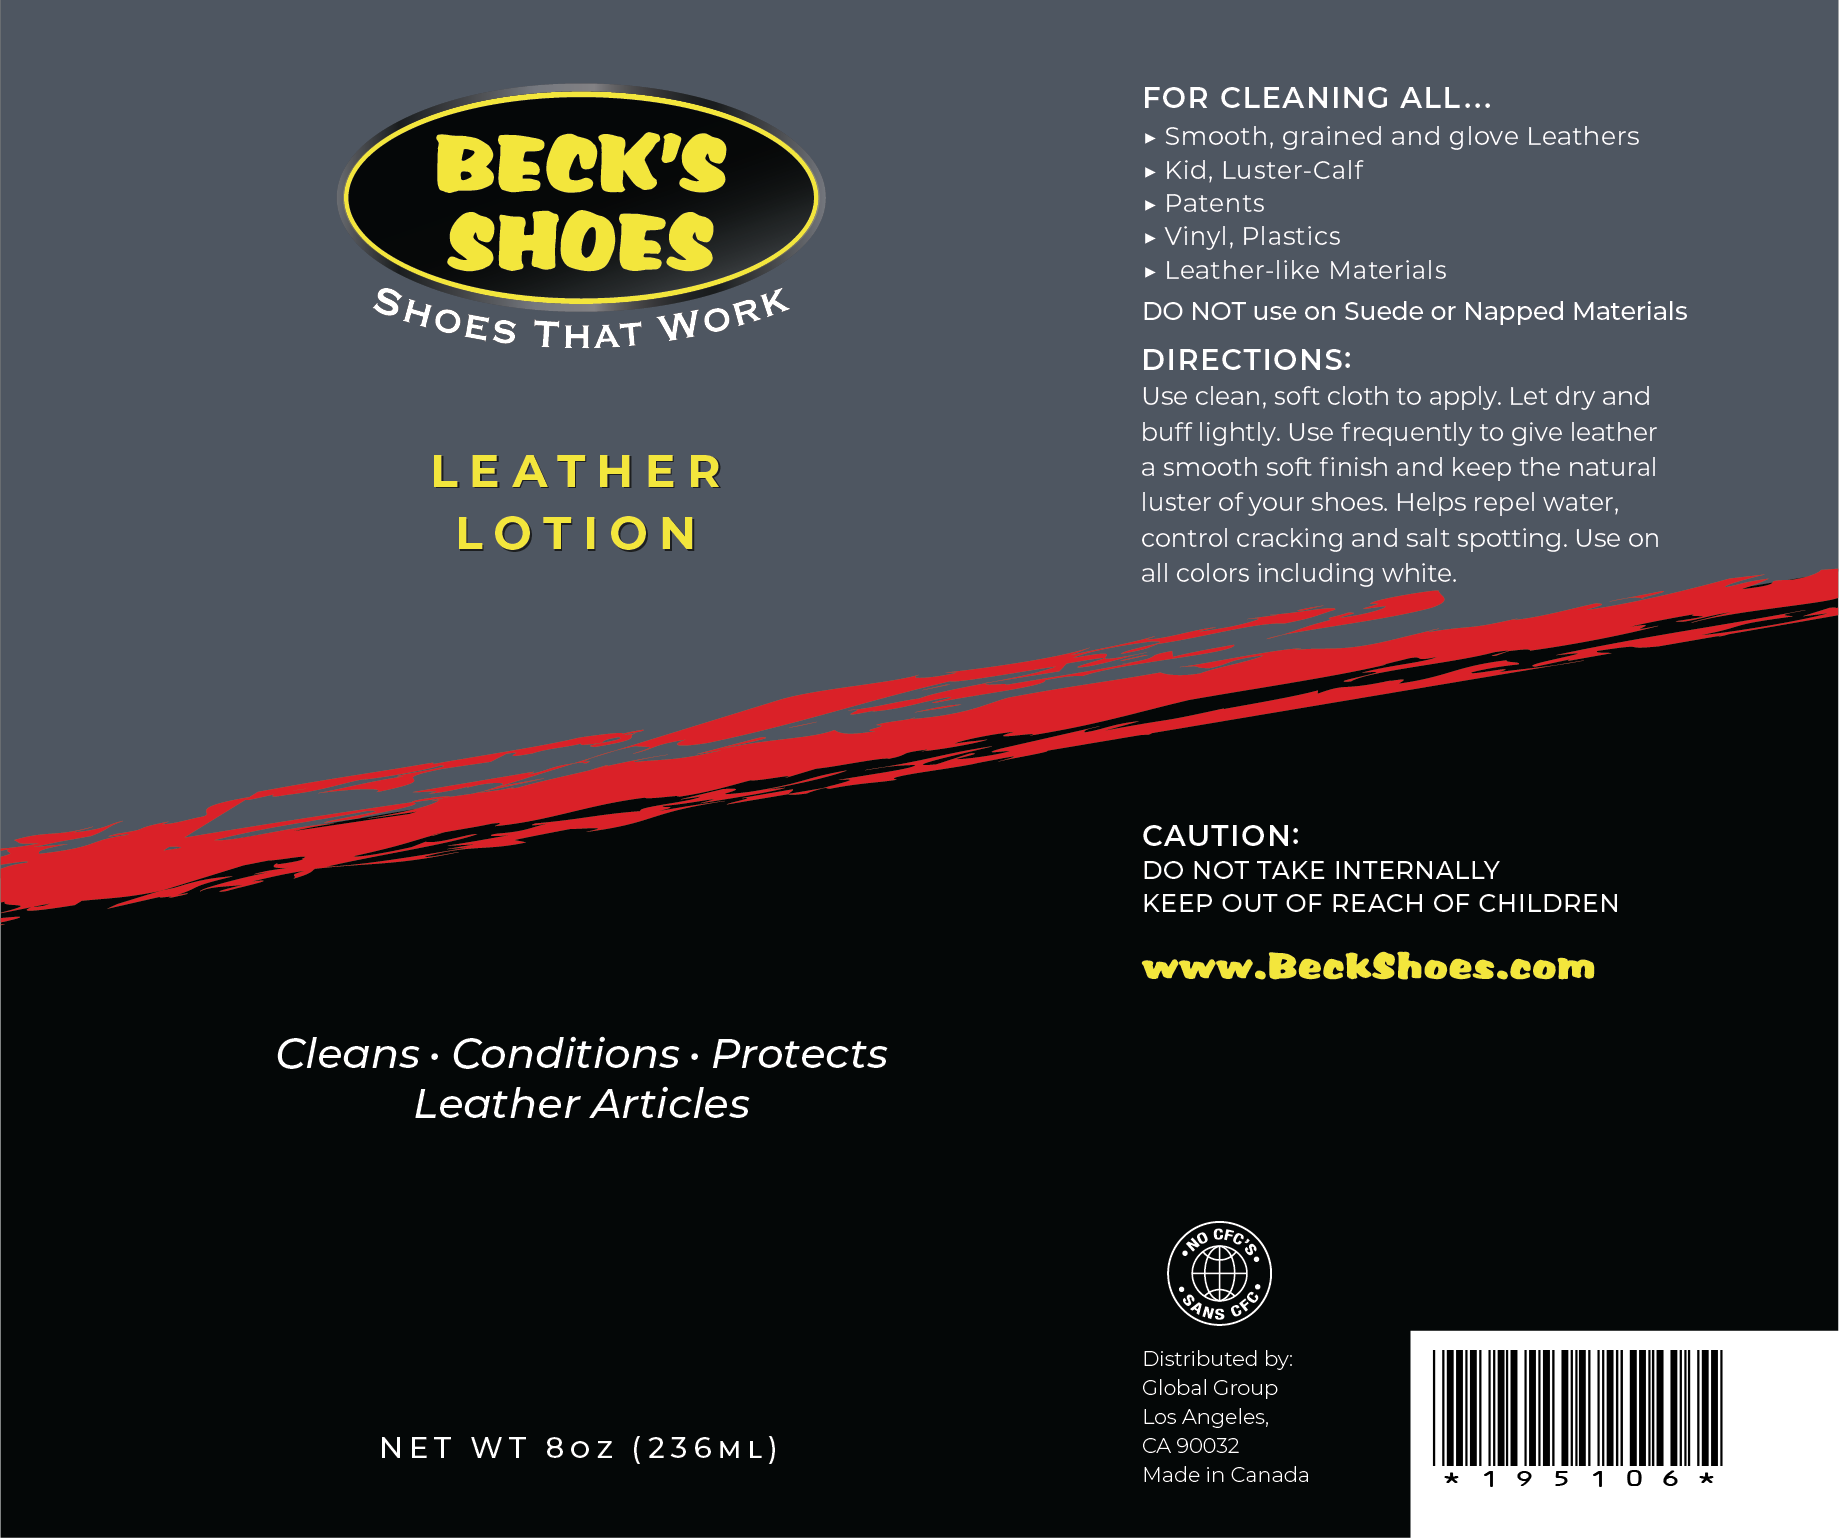 Beck's Shoes Leather Lotion 195106 - Shoe Care Label